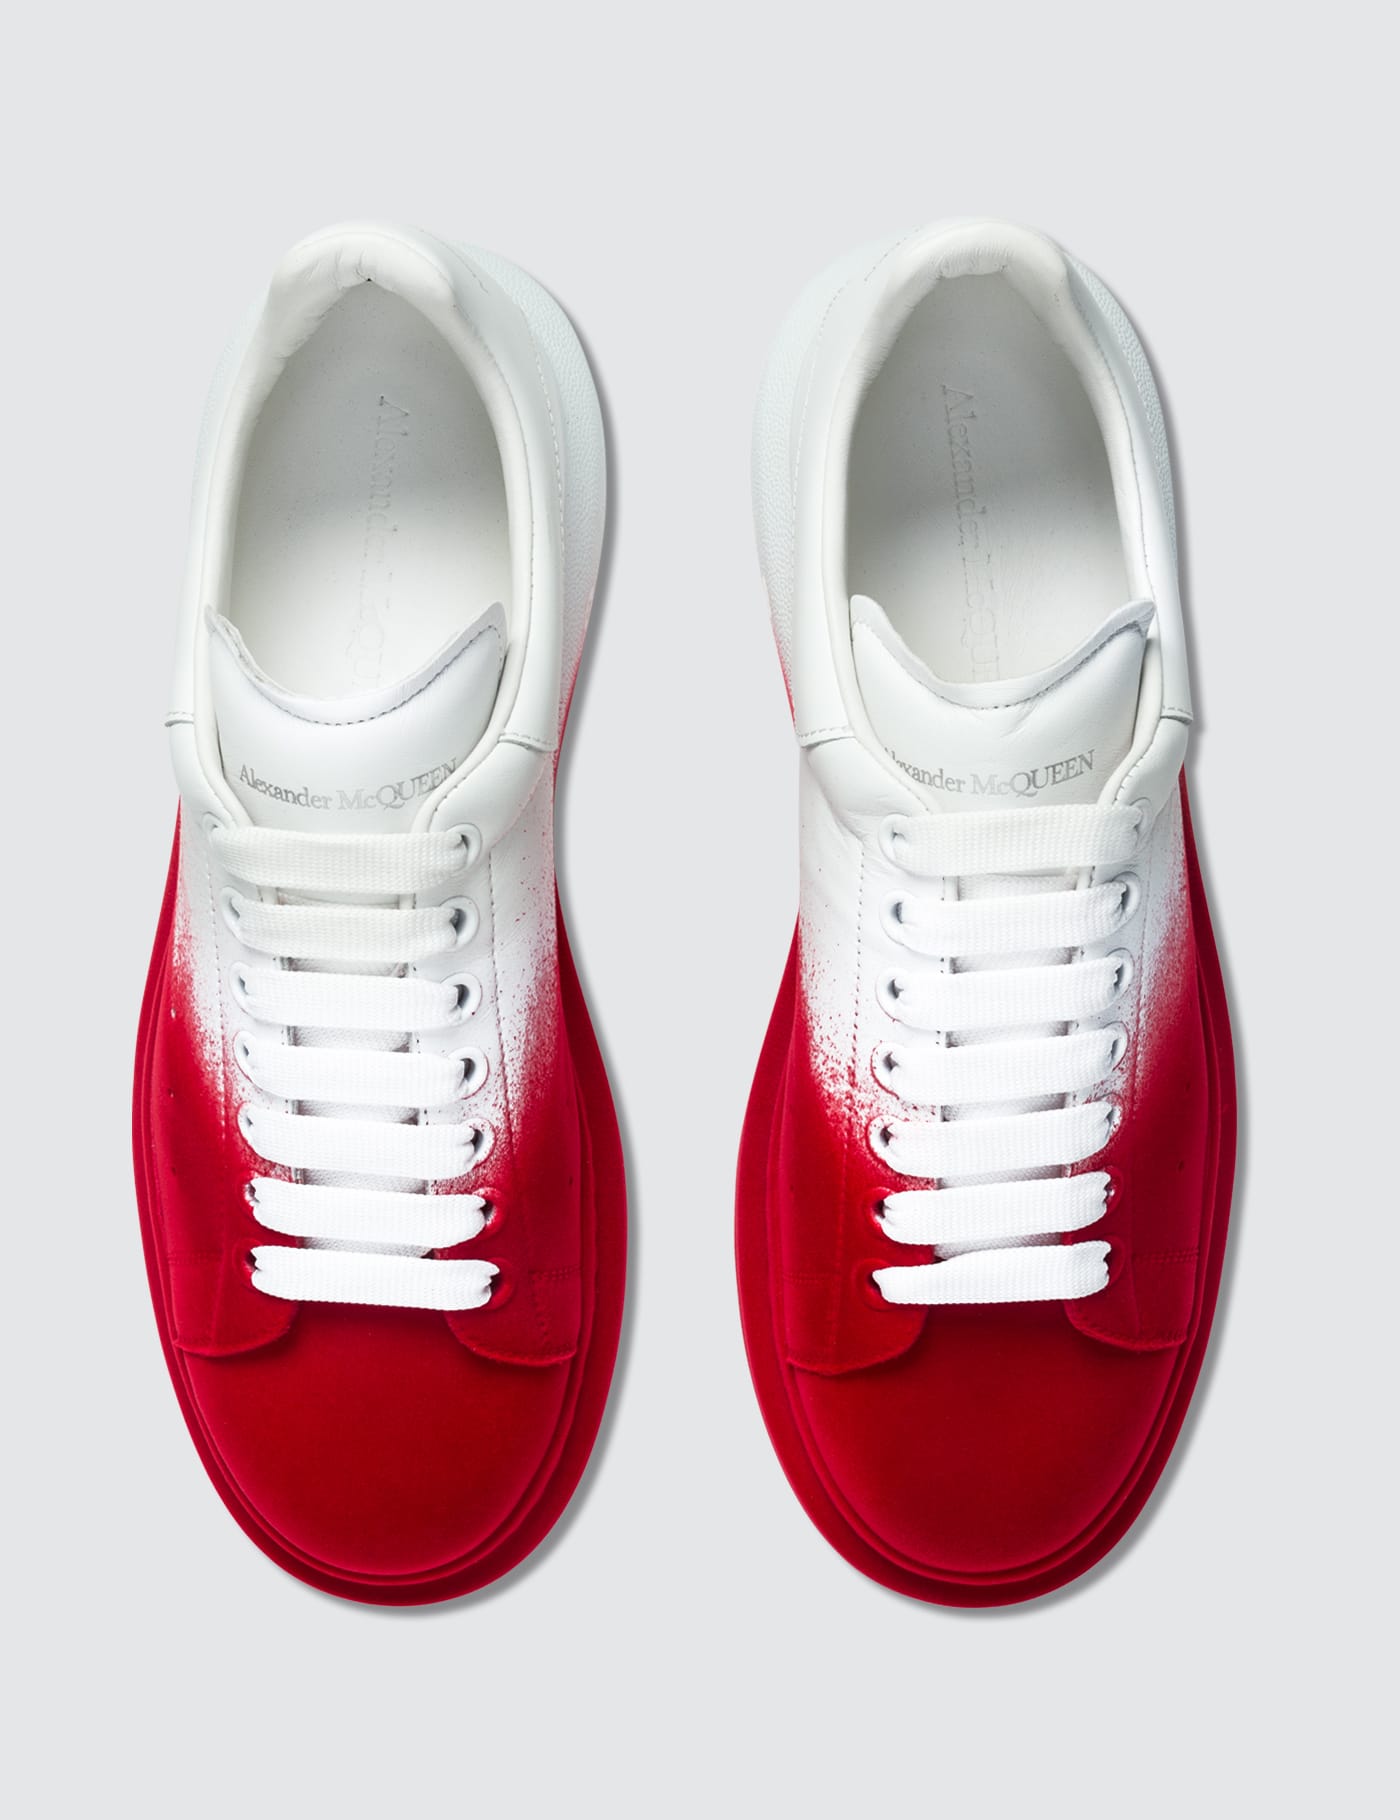 red spray paint for shoes